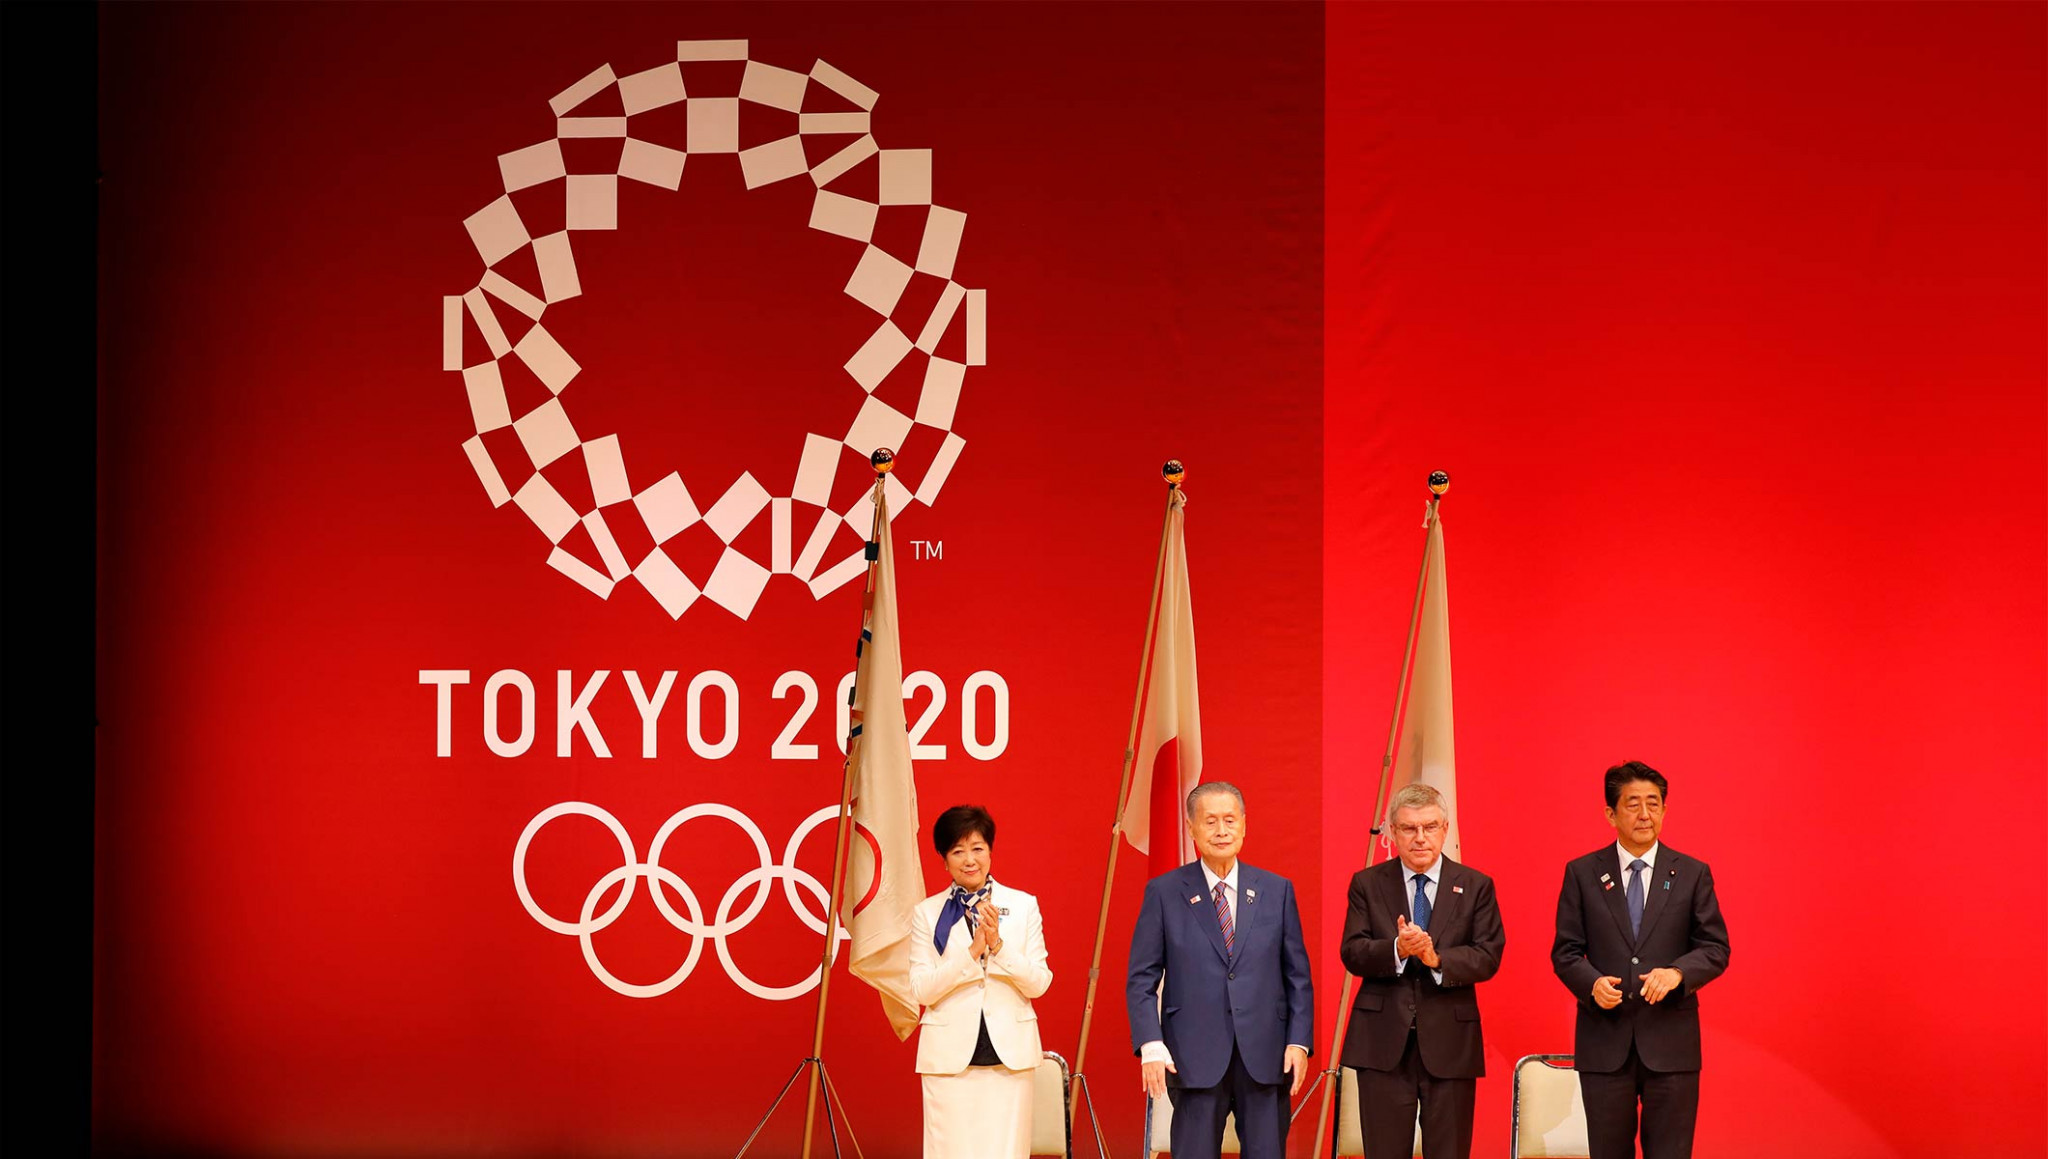 Bach claims Japan will make history as Tokyo 2020 one-year-to-go celebrations are held